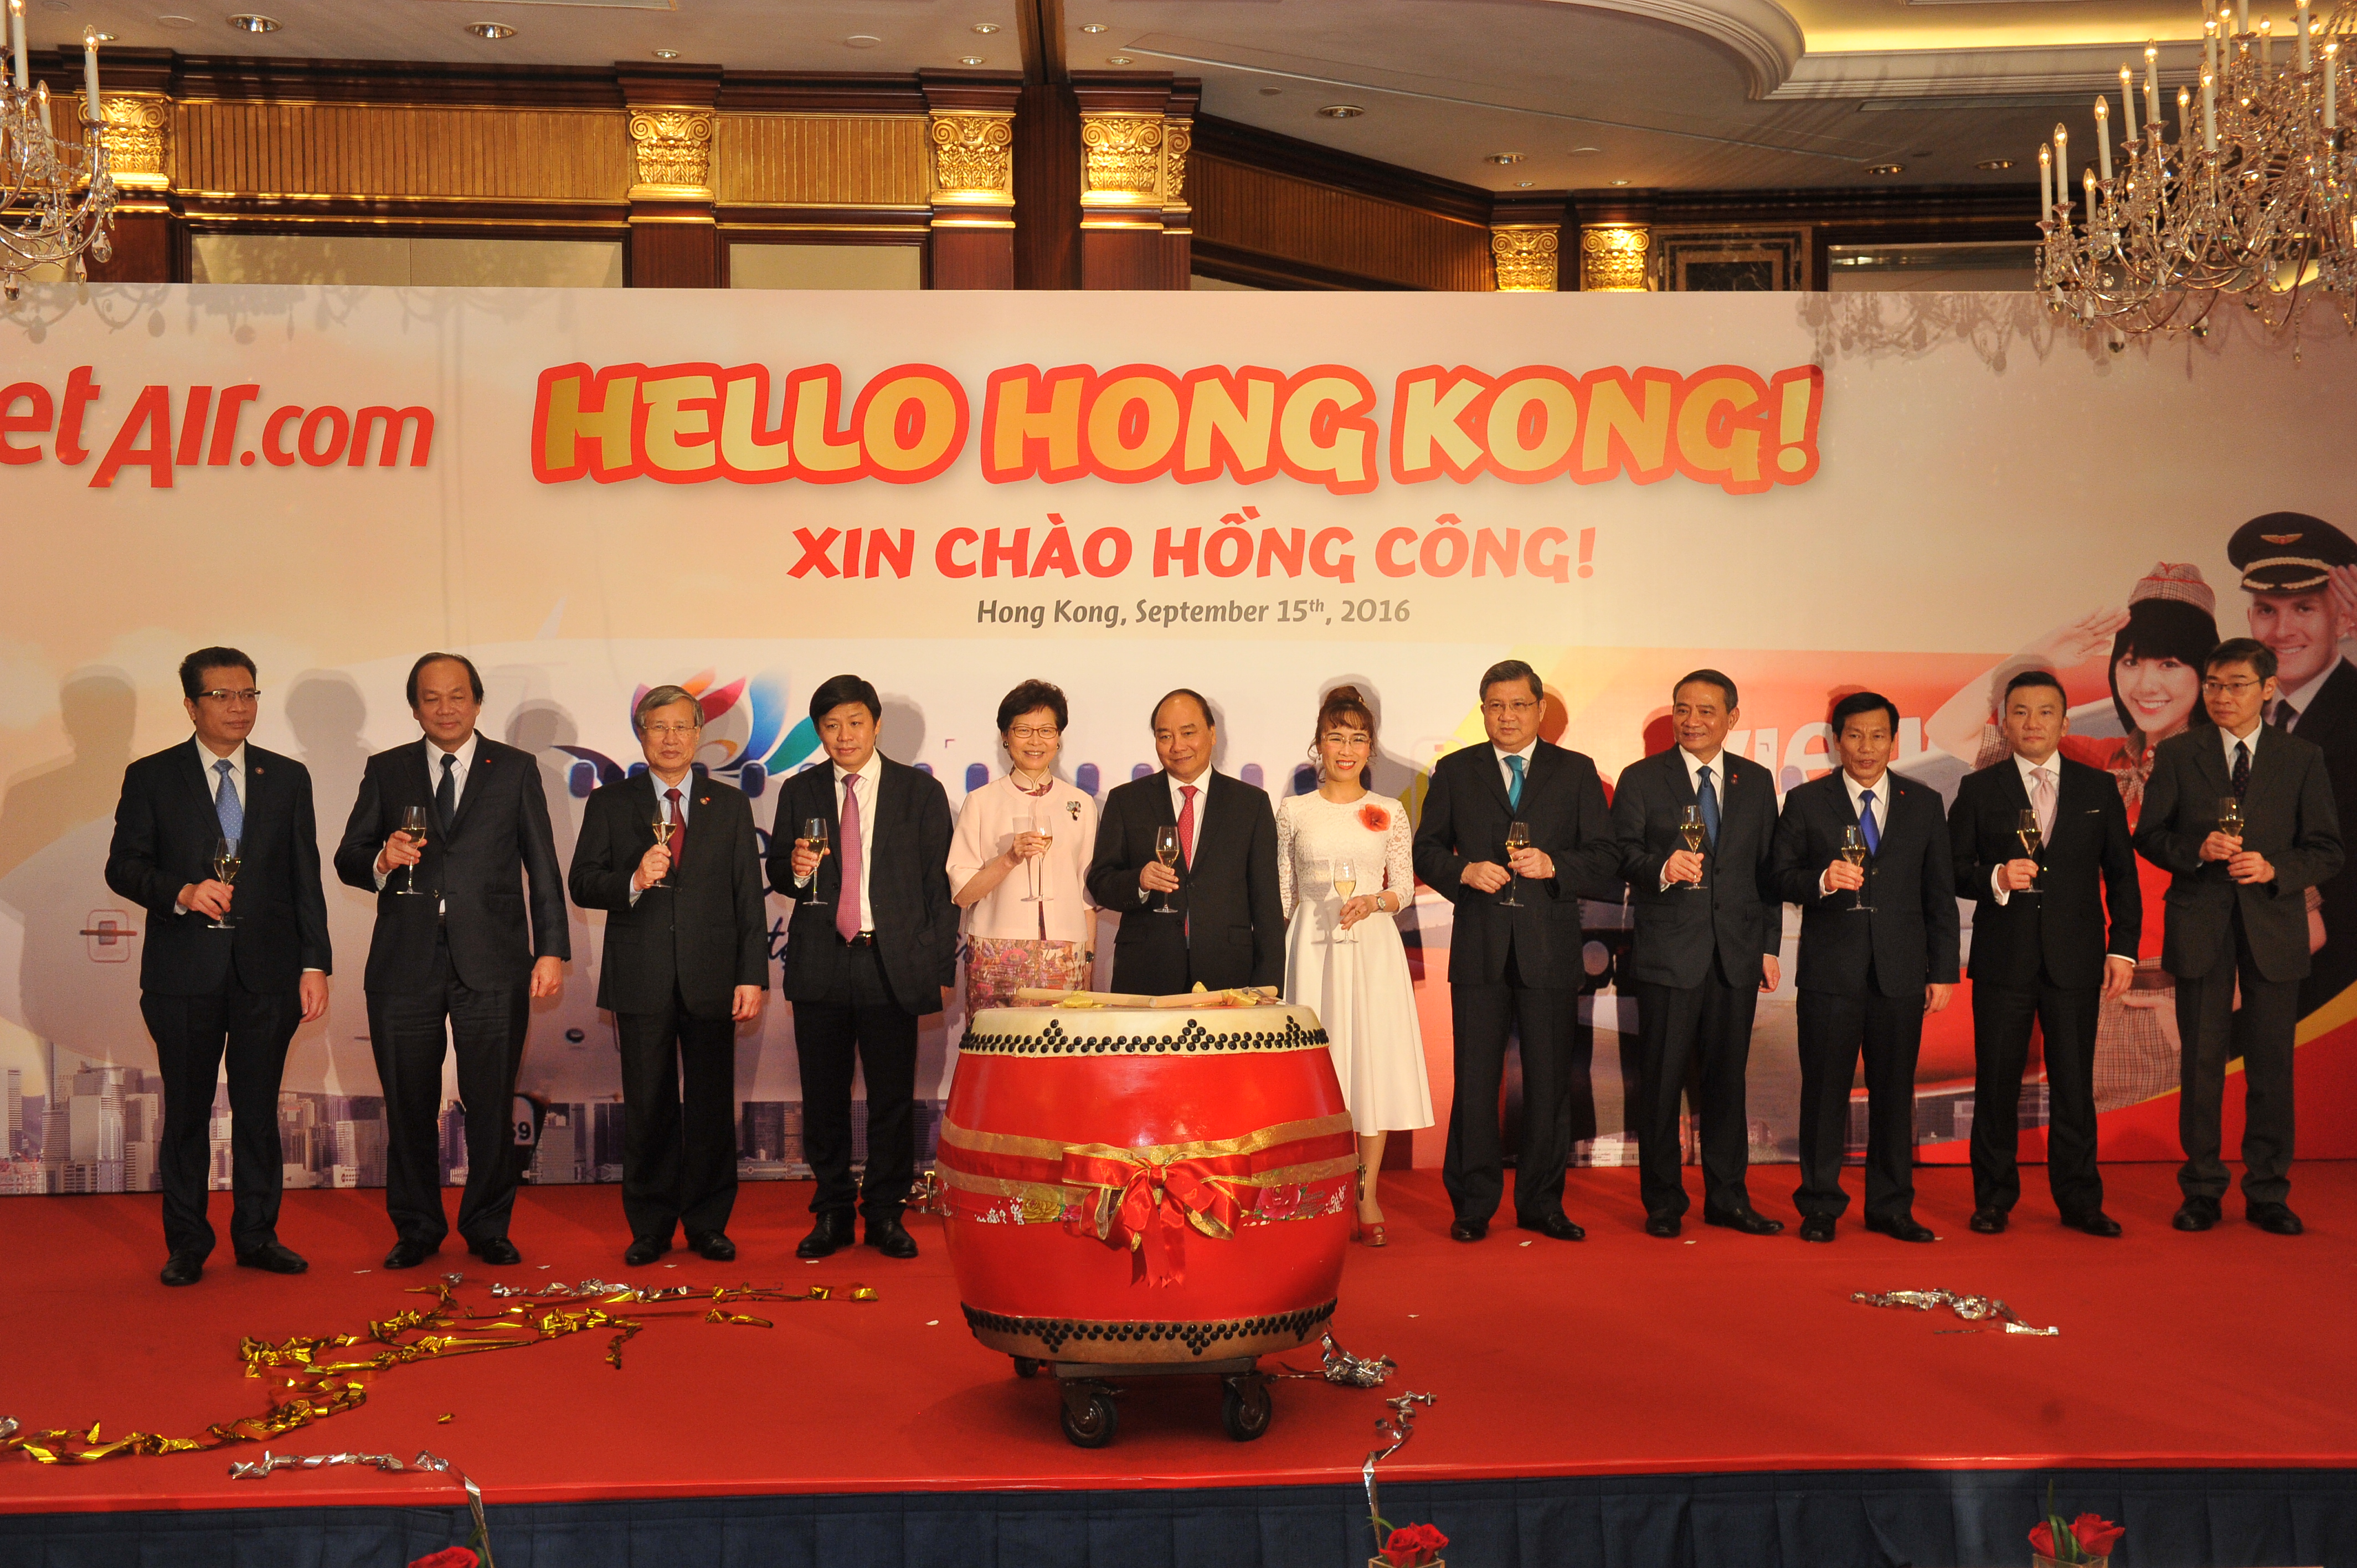 Vietnamese airline to launch Ho Chi Minh City-Hong Kong route this December